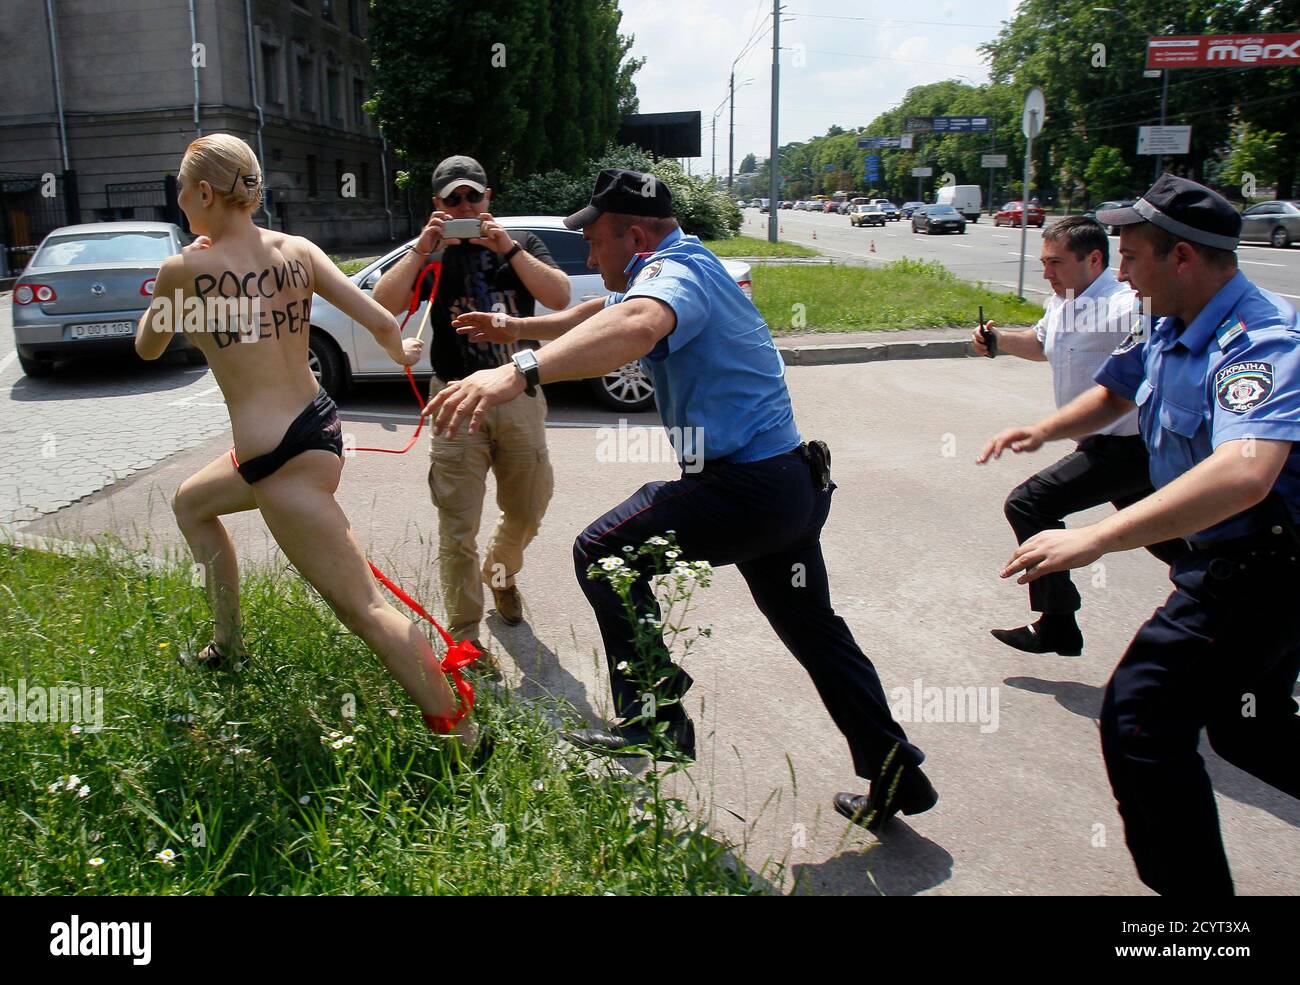 Interior Ministry officers and a security guard chase an activist from the women's rights group FEMEN, as she stages a demonstration outside the Russian embassy in response to Russian President Vladimir Putin's announcement of his separation from his wife Lyudmila, in Kiev, June 7, 2013. The woman intended to portray Olympic rhythmic gymnast Alina Kabayeva, referring to speculations that Putin could date the former sportswoman, according to FEMEN's press release. The words on the woman's back read, 'Push Russia forward!' REUTERS/Gleb Garanich (UKRAINE - Tags: CIVIL UNREST POLITICS) Stock Photo